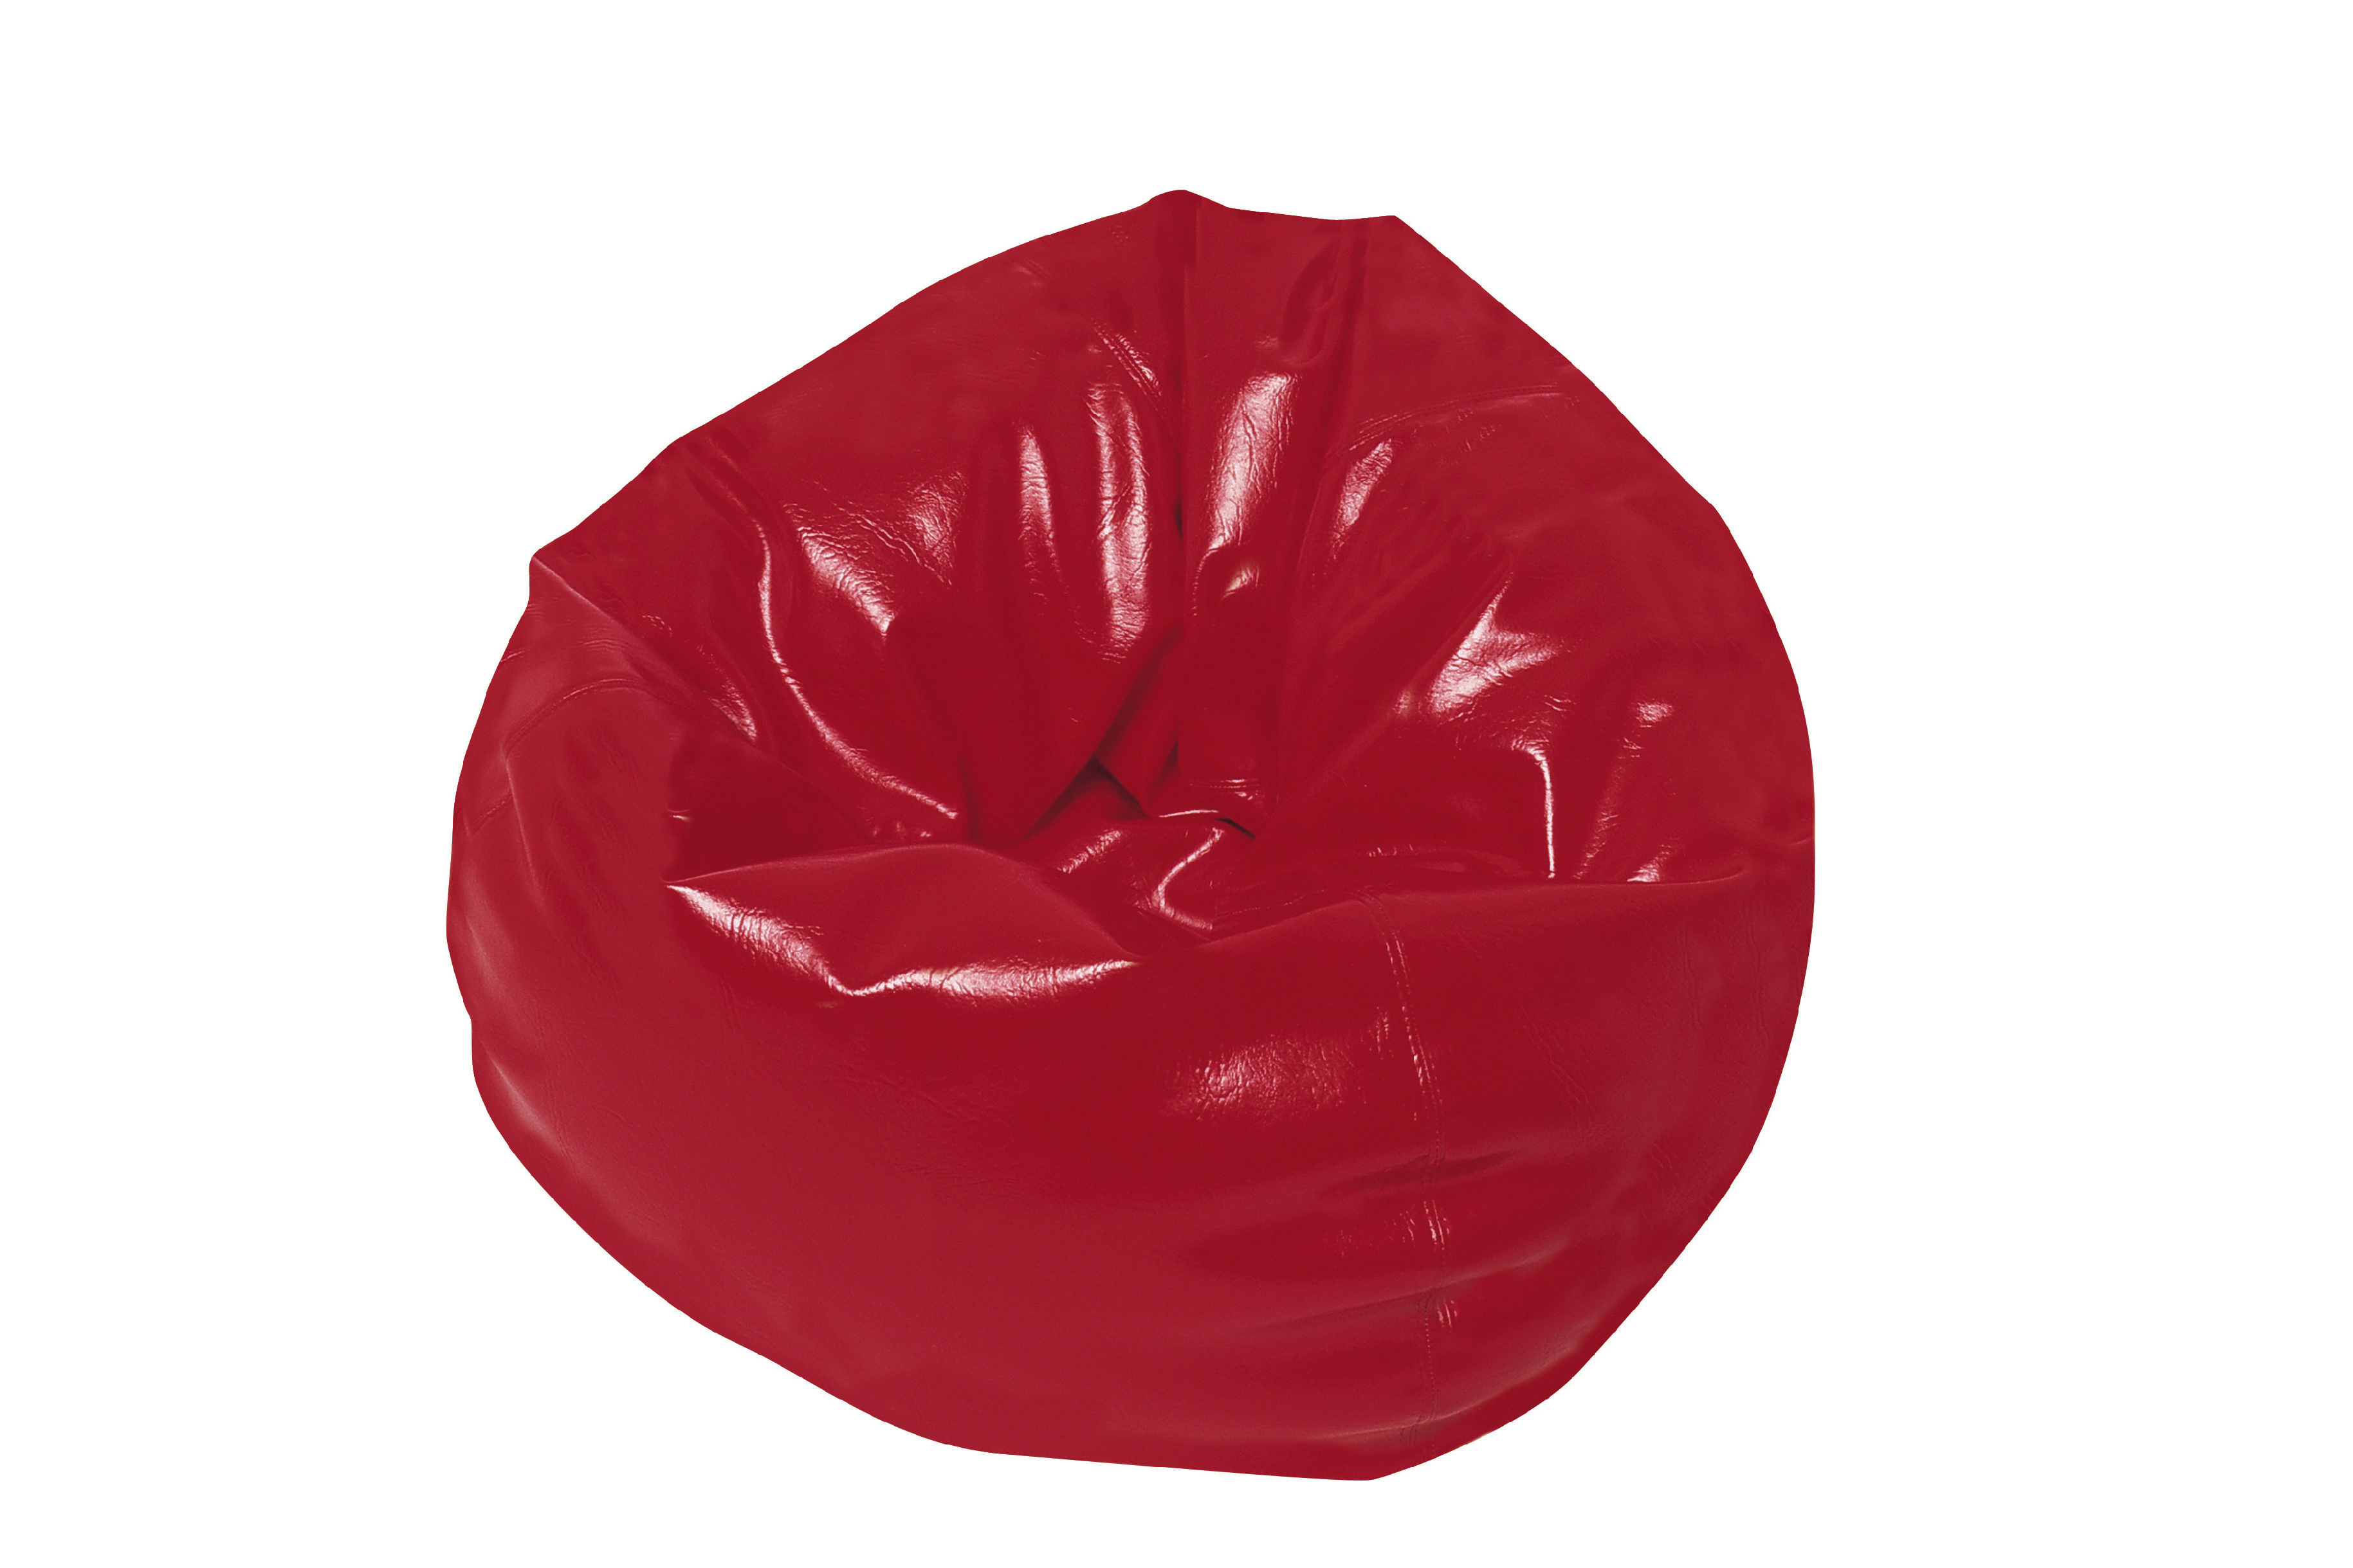 Red leather bean bag chair in a relaxed and slightly wrinkled position, typical of 1990s home decor